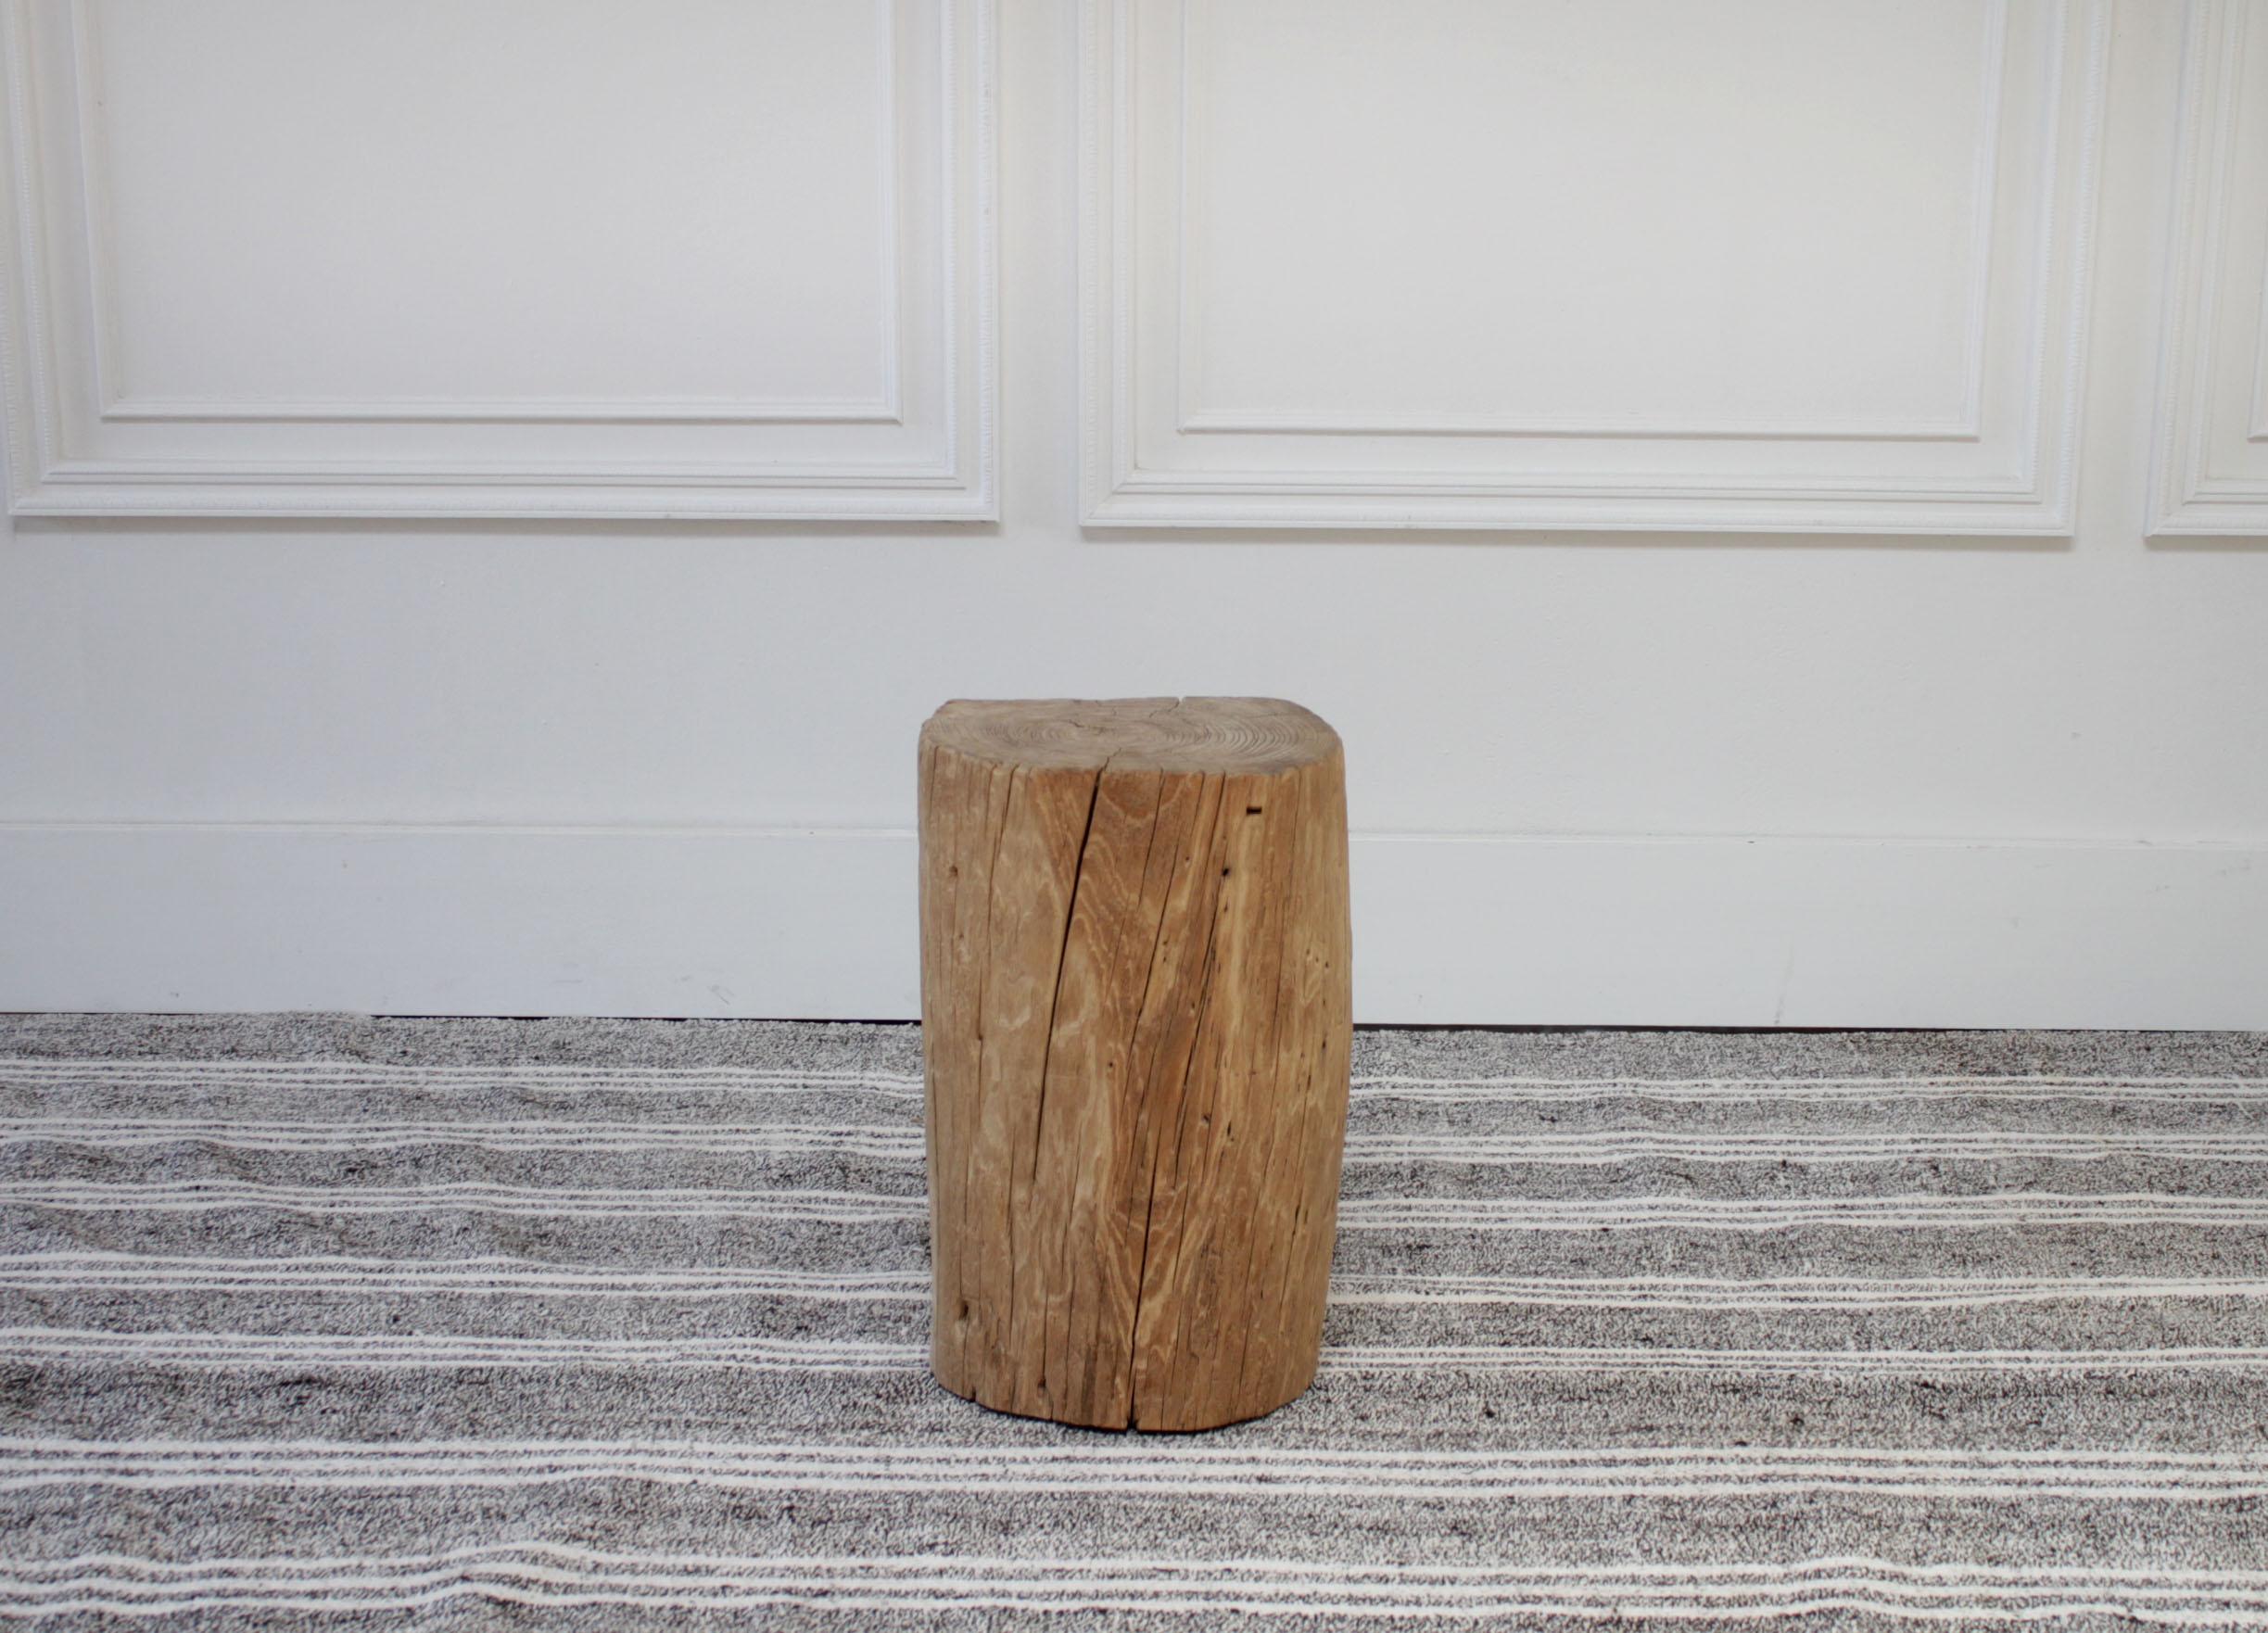 Chinese elmwood side table or stool
Perfect side table next to a sofa or between chairs, this stump can also be used in a bathroom to hold a candle or your towels.
Measures: 12 x 9.5 x 19 H.

  